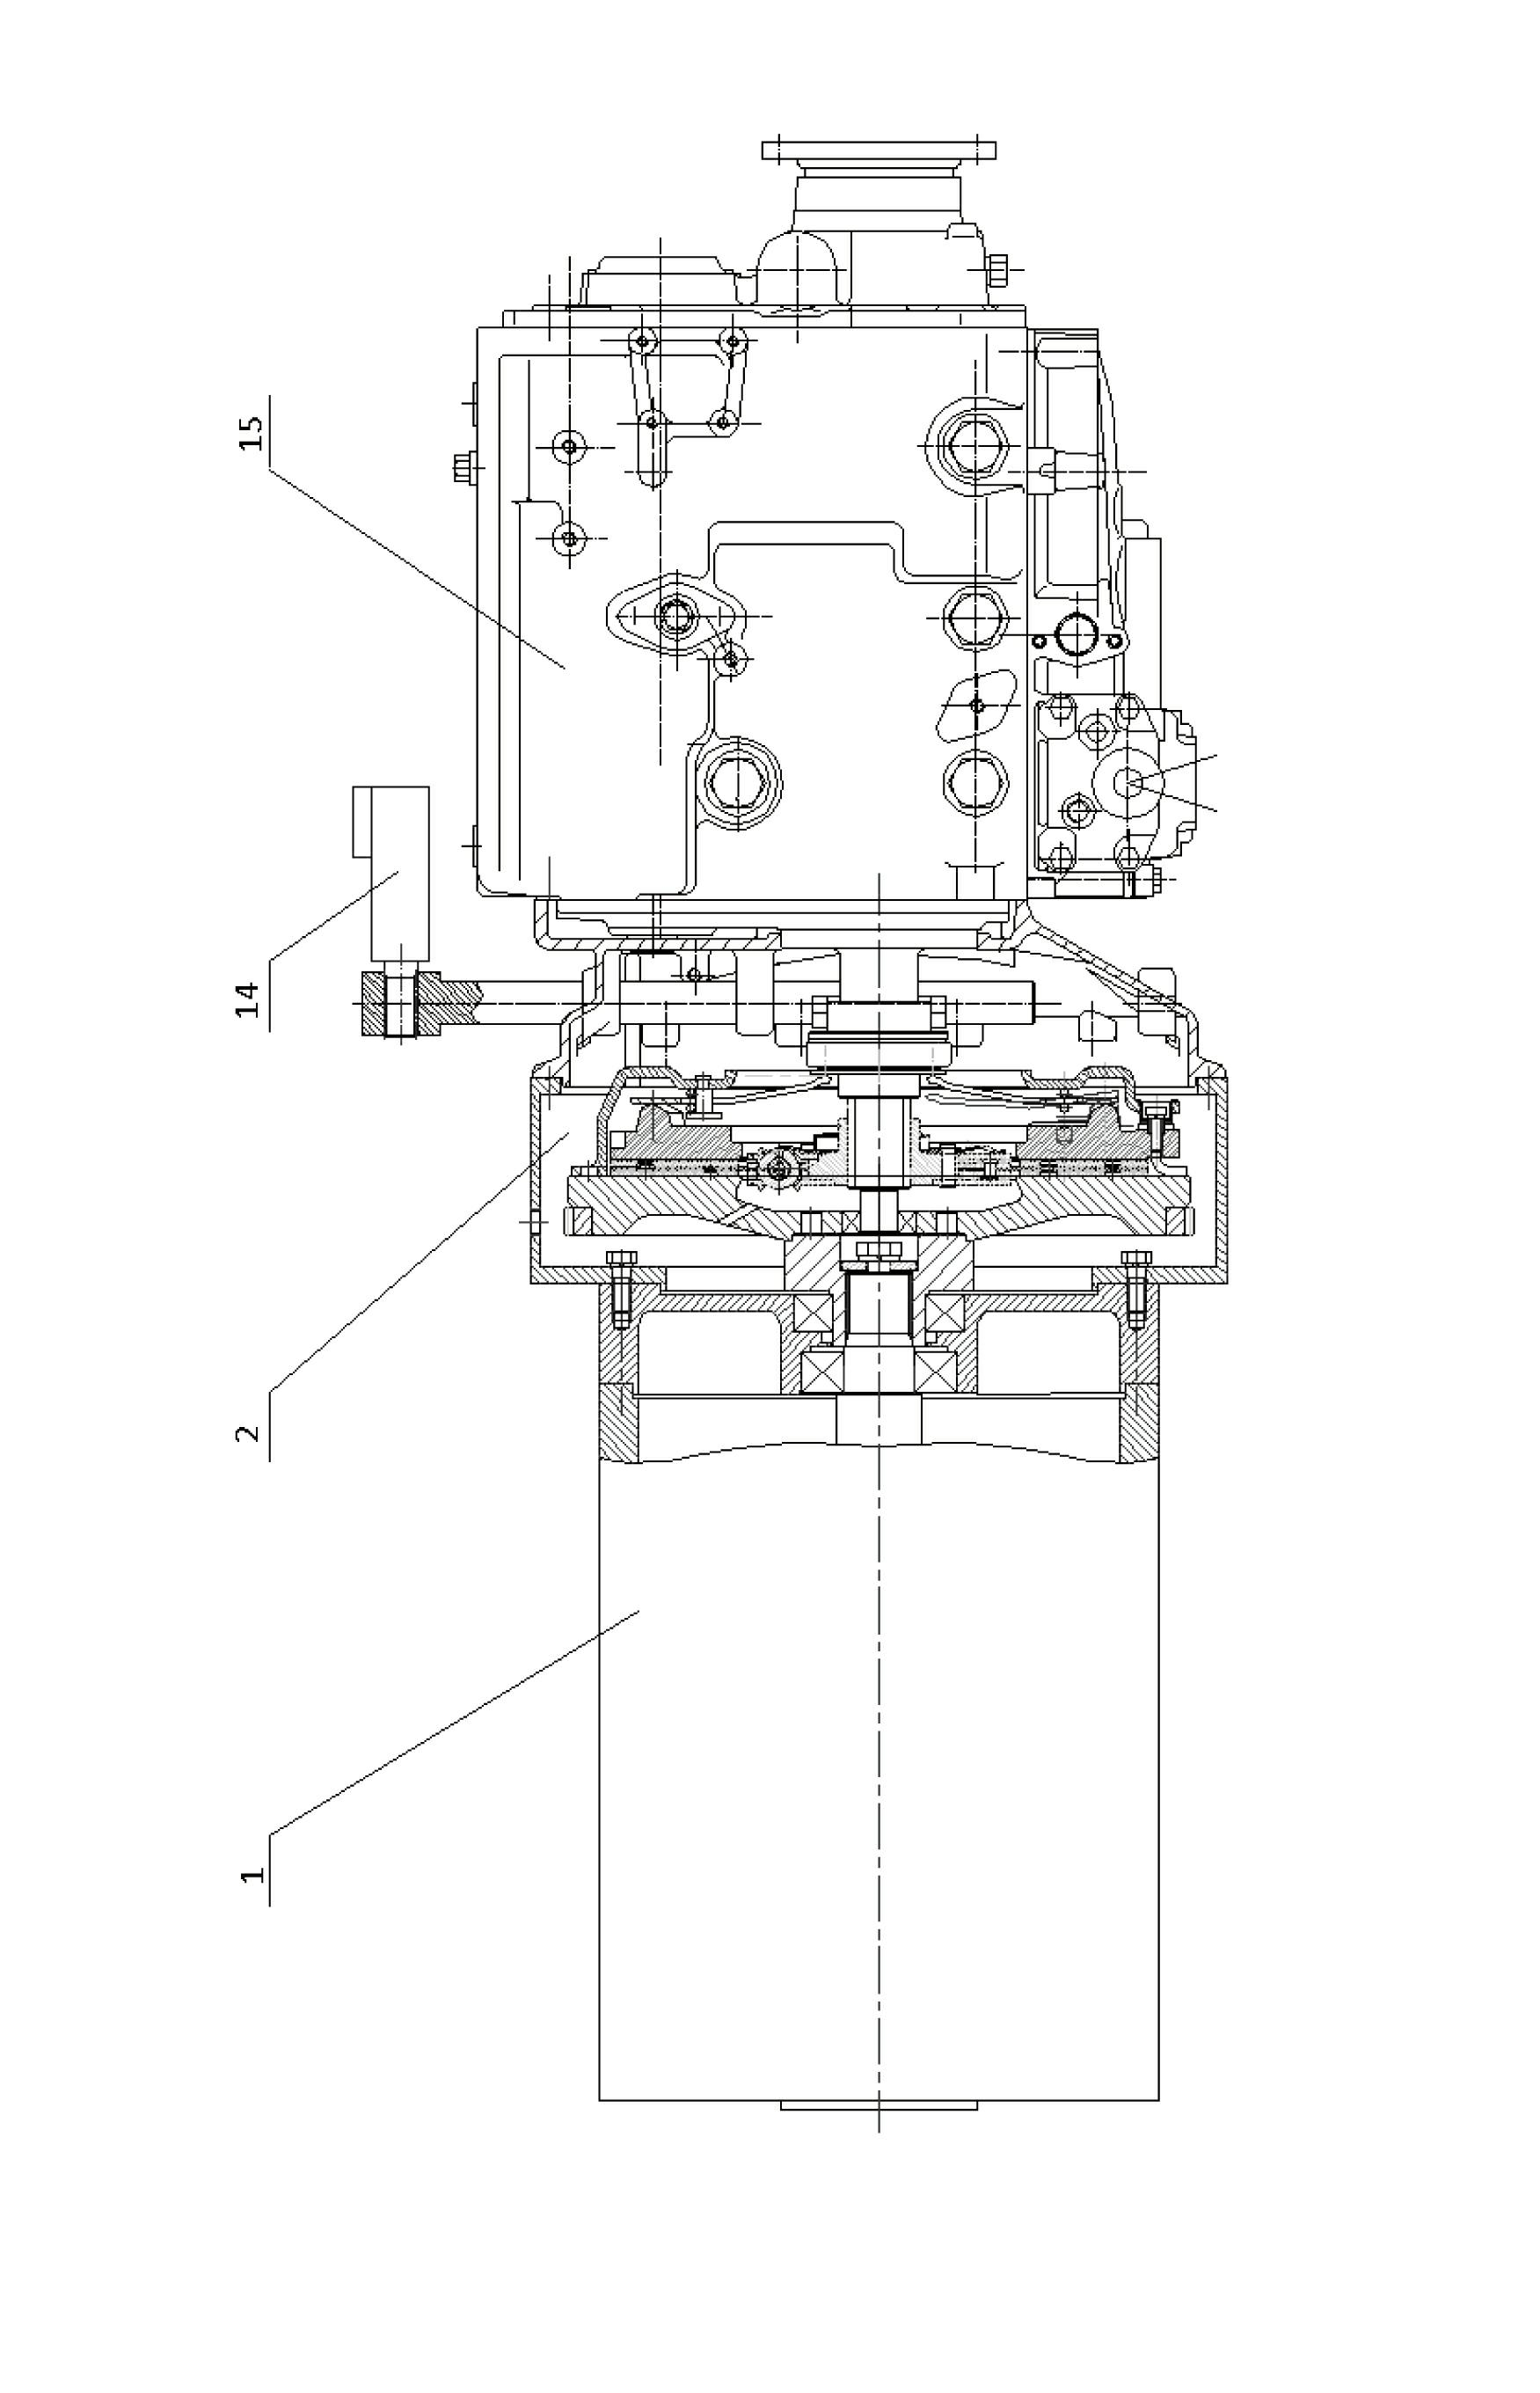 Driving system for electric vehicle